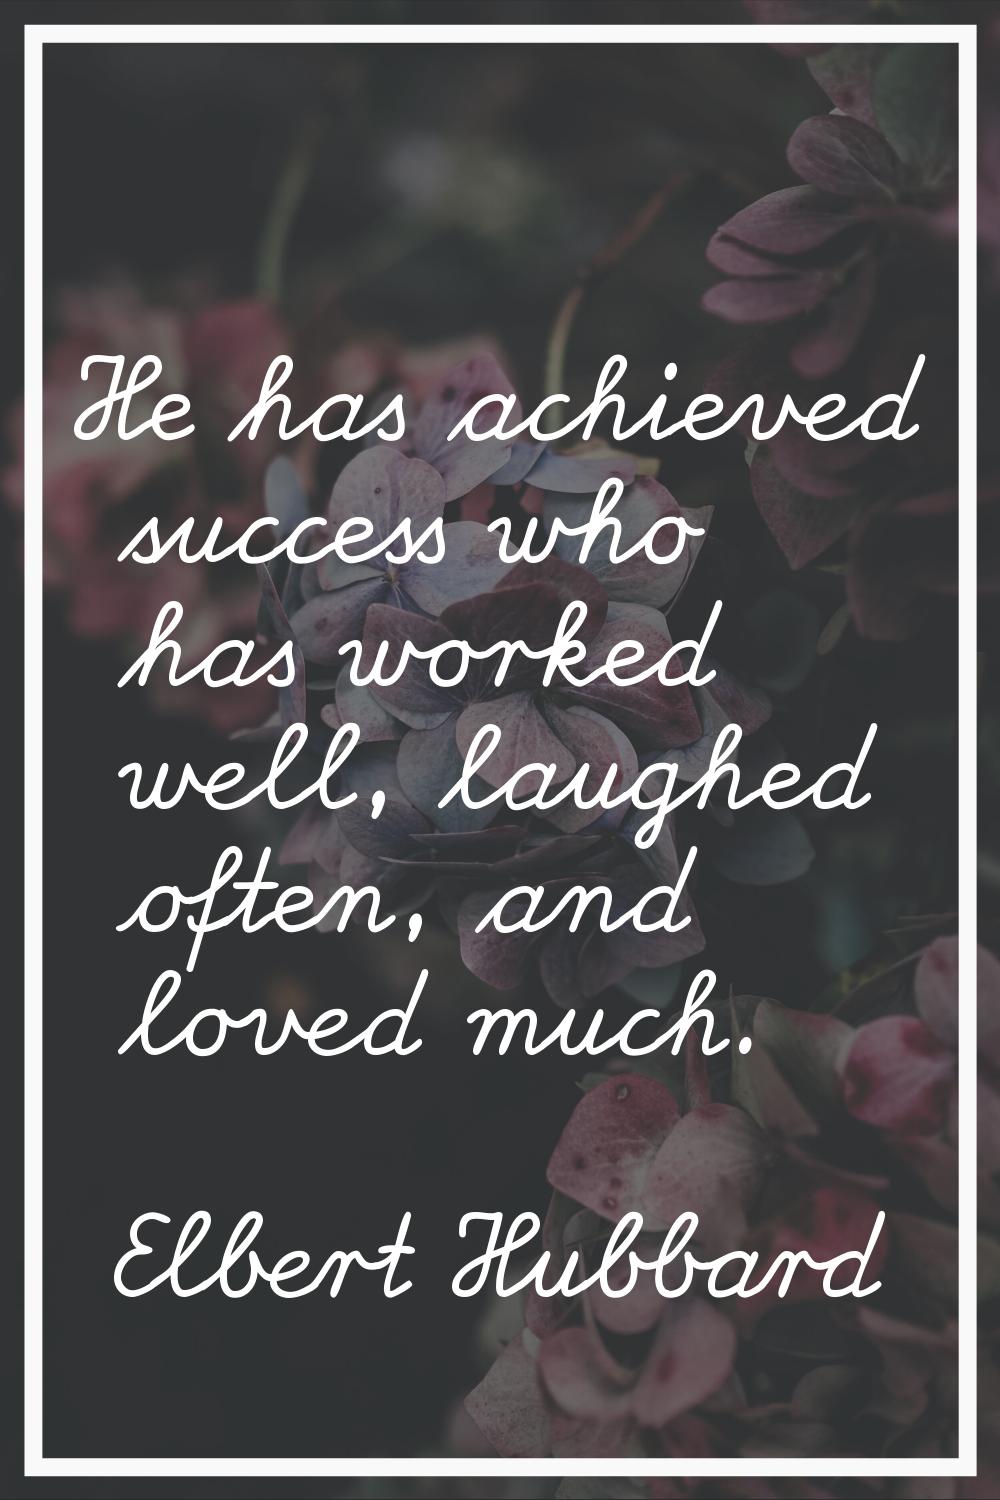 He has achieved success who has worked well, laughed often, and loved much.